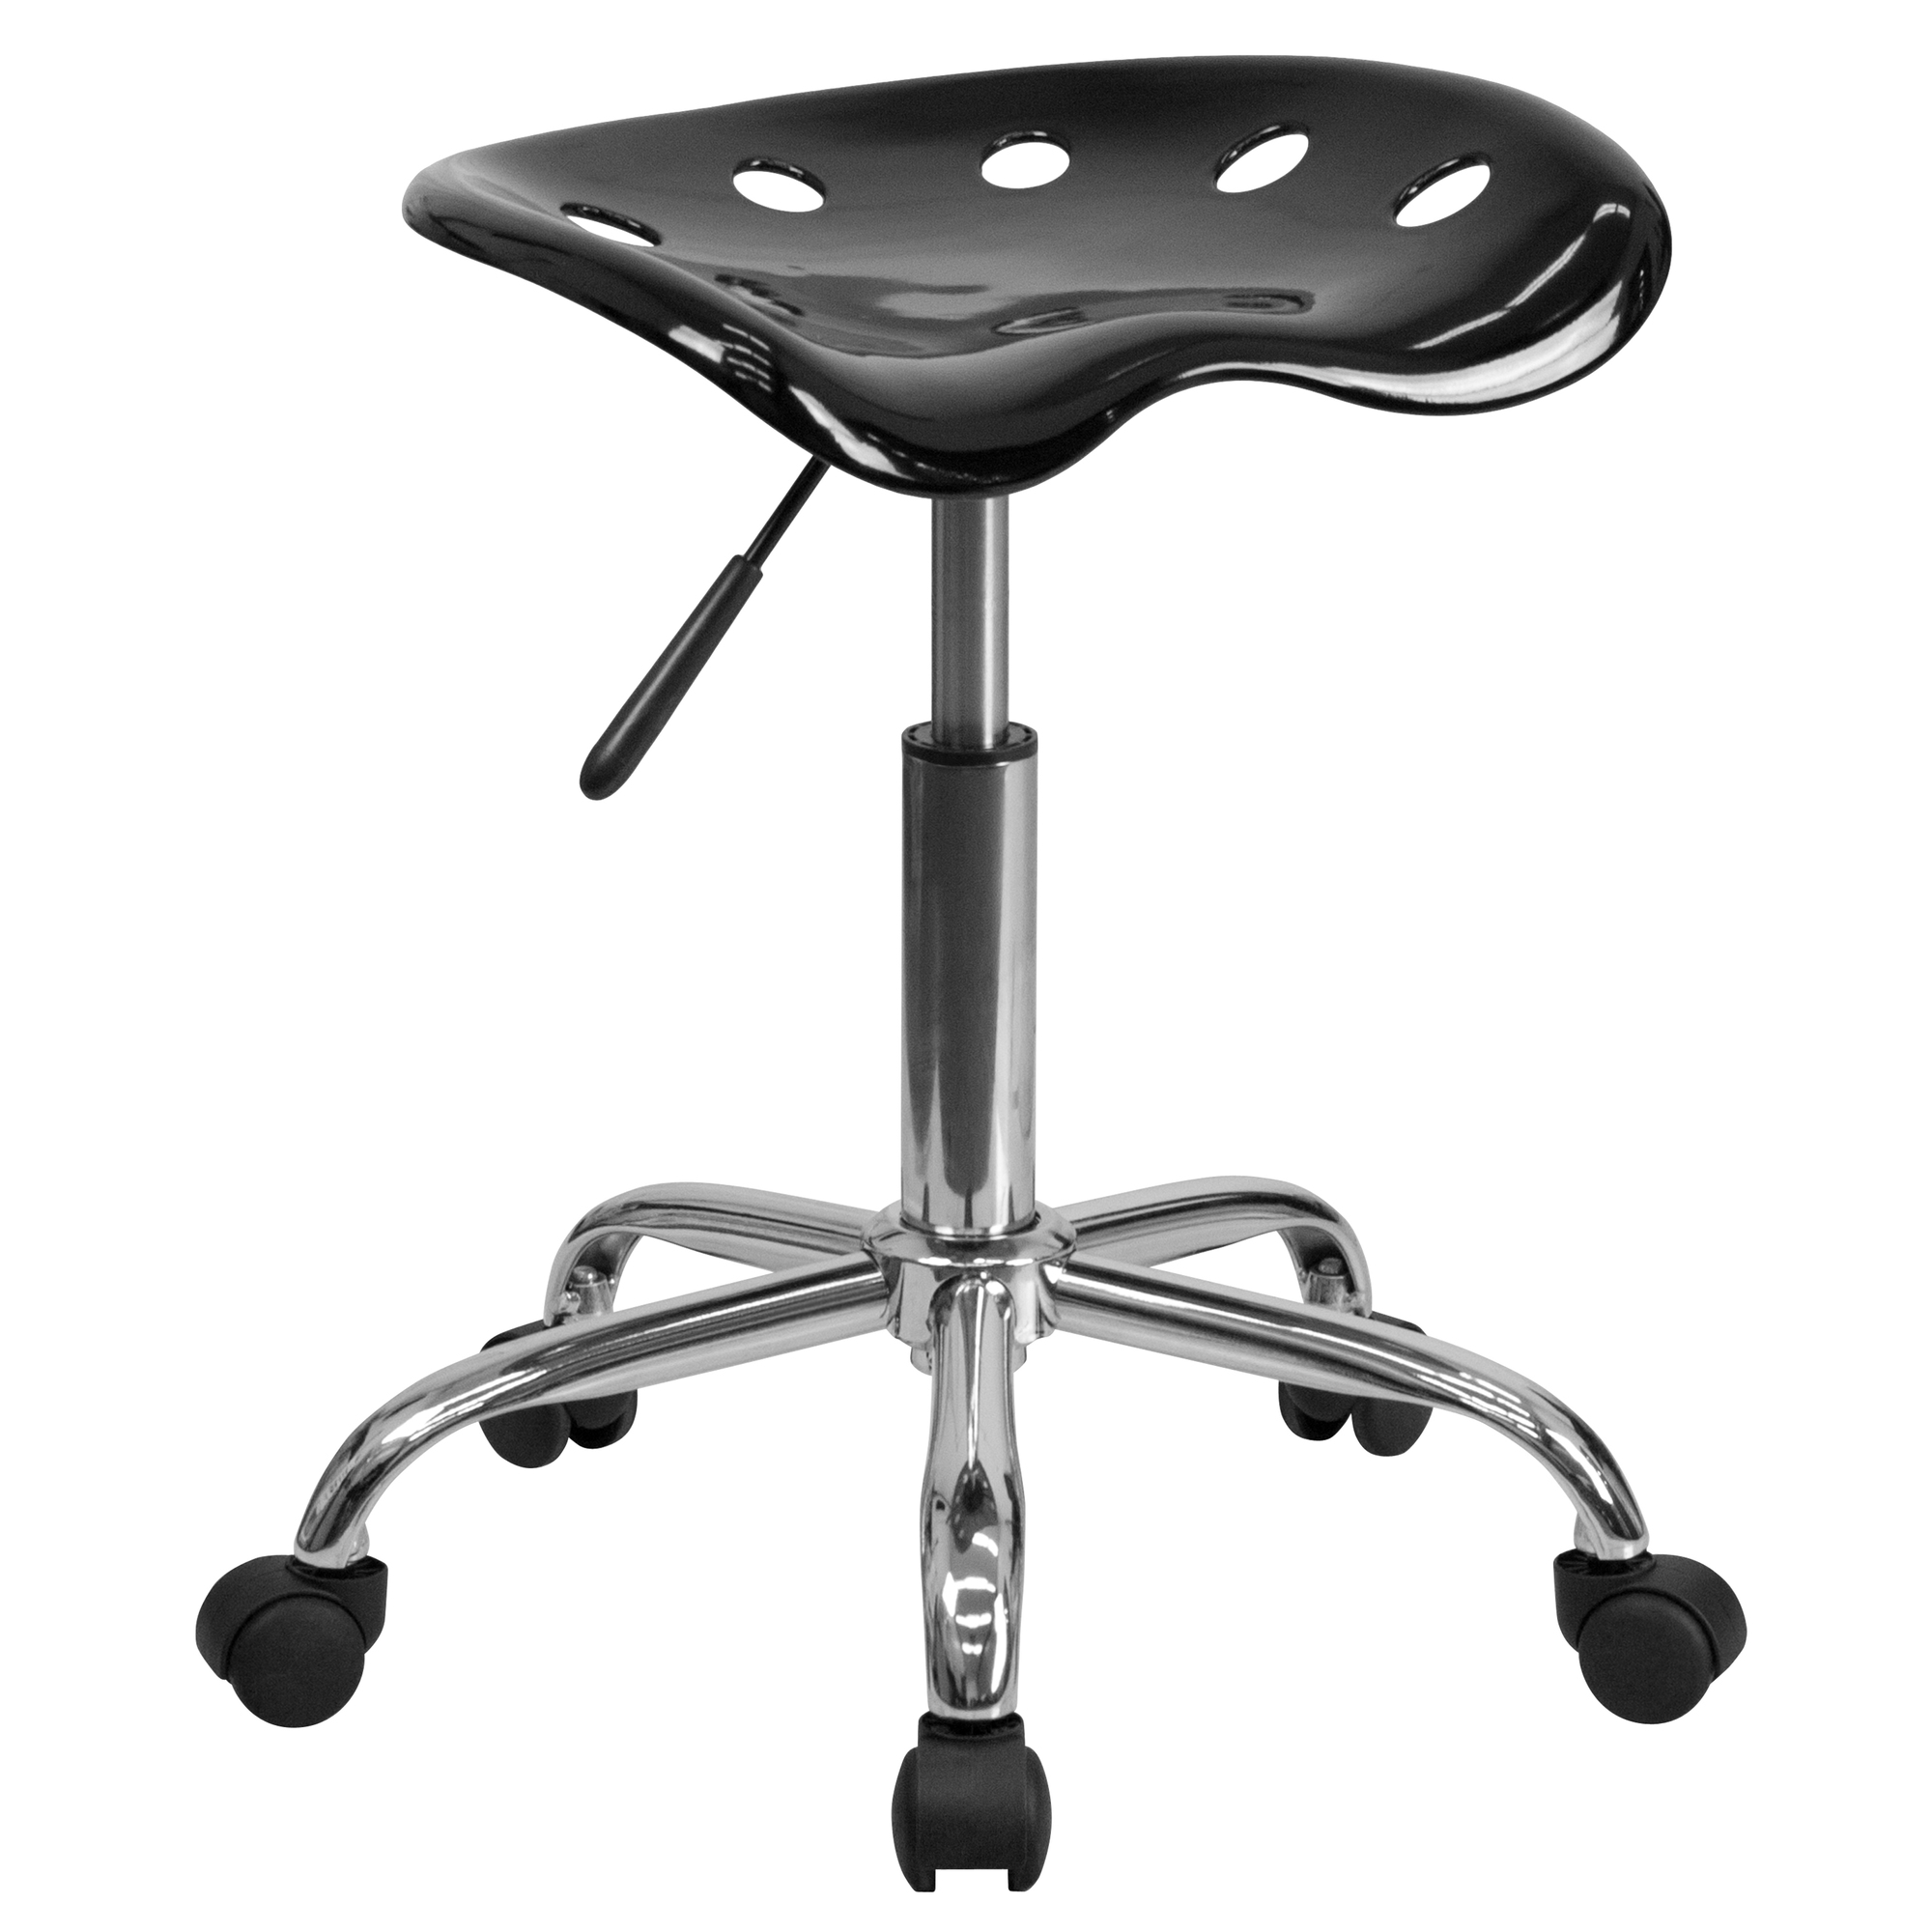 Vibrant Black Tractor Seat and Chrome Stool, Primary Color Black, Included (qty.) 1, Model - Flash Furniture LF214ABLACK